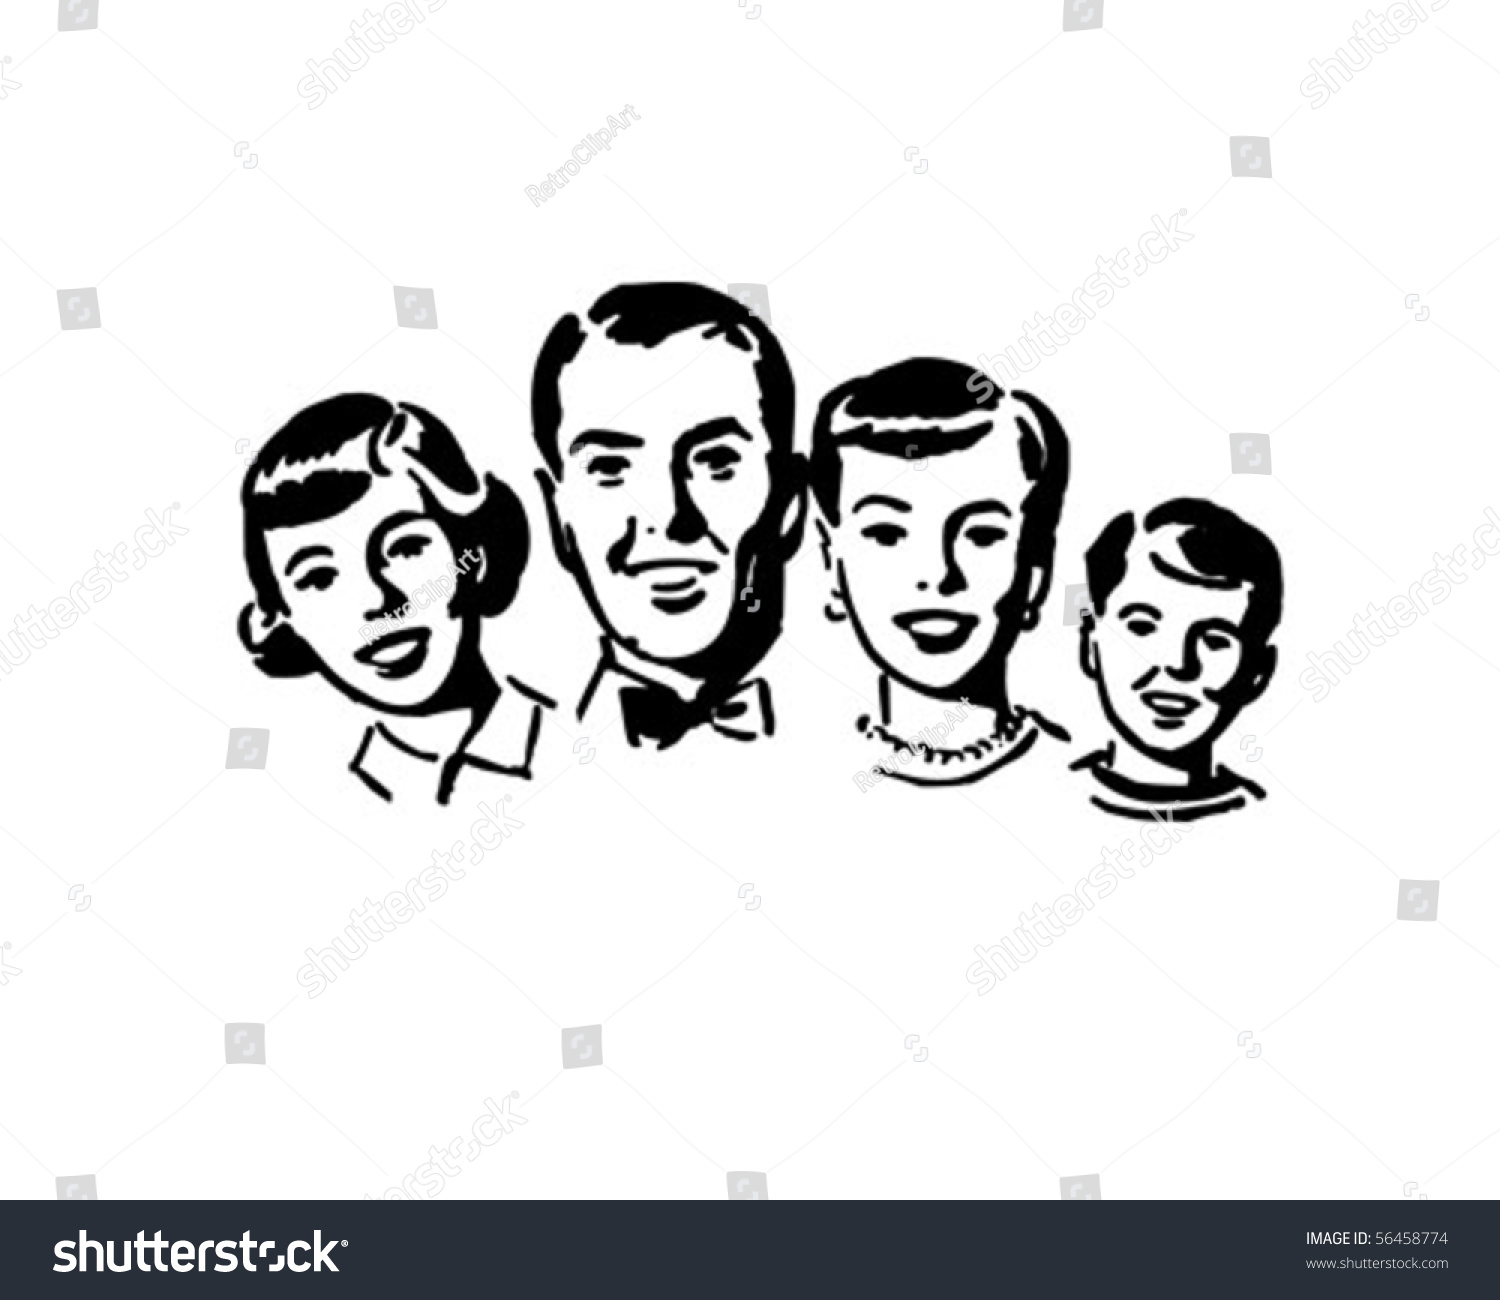 family group clipart - photo #40